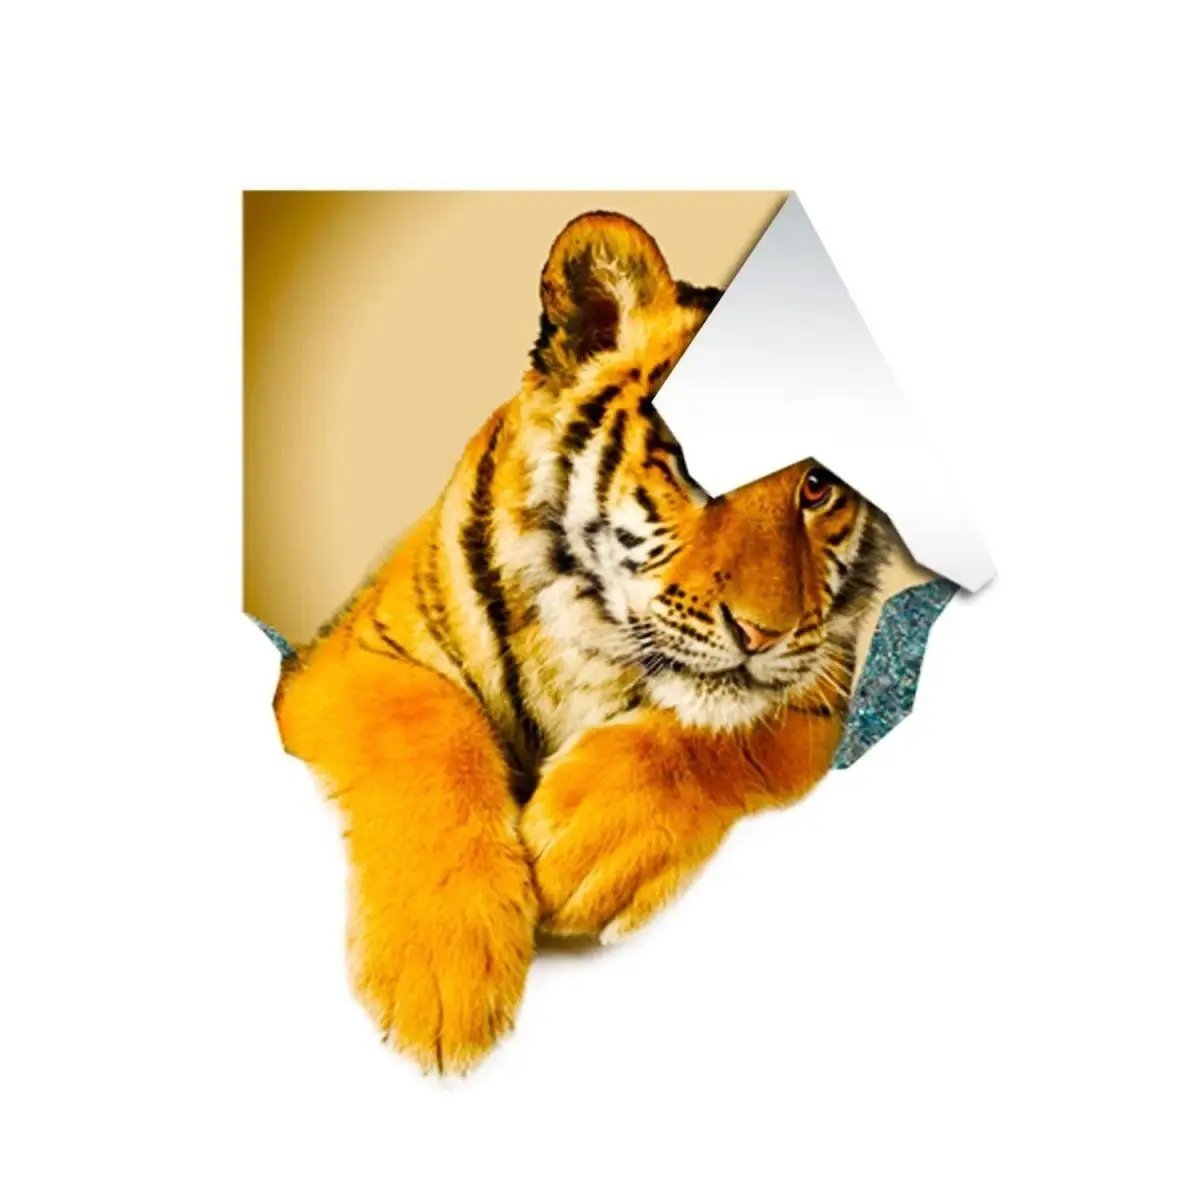 3D Tiger Porthole Wall Decal: Captivating Optical Illusion for Bedroom Décor - Decords